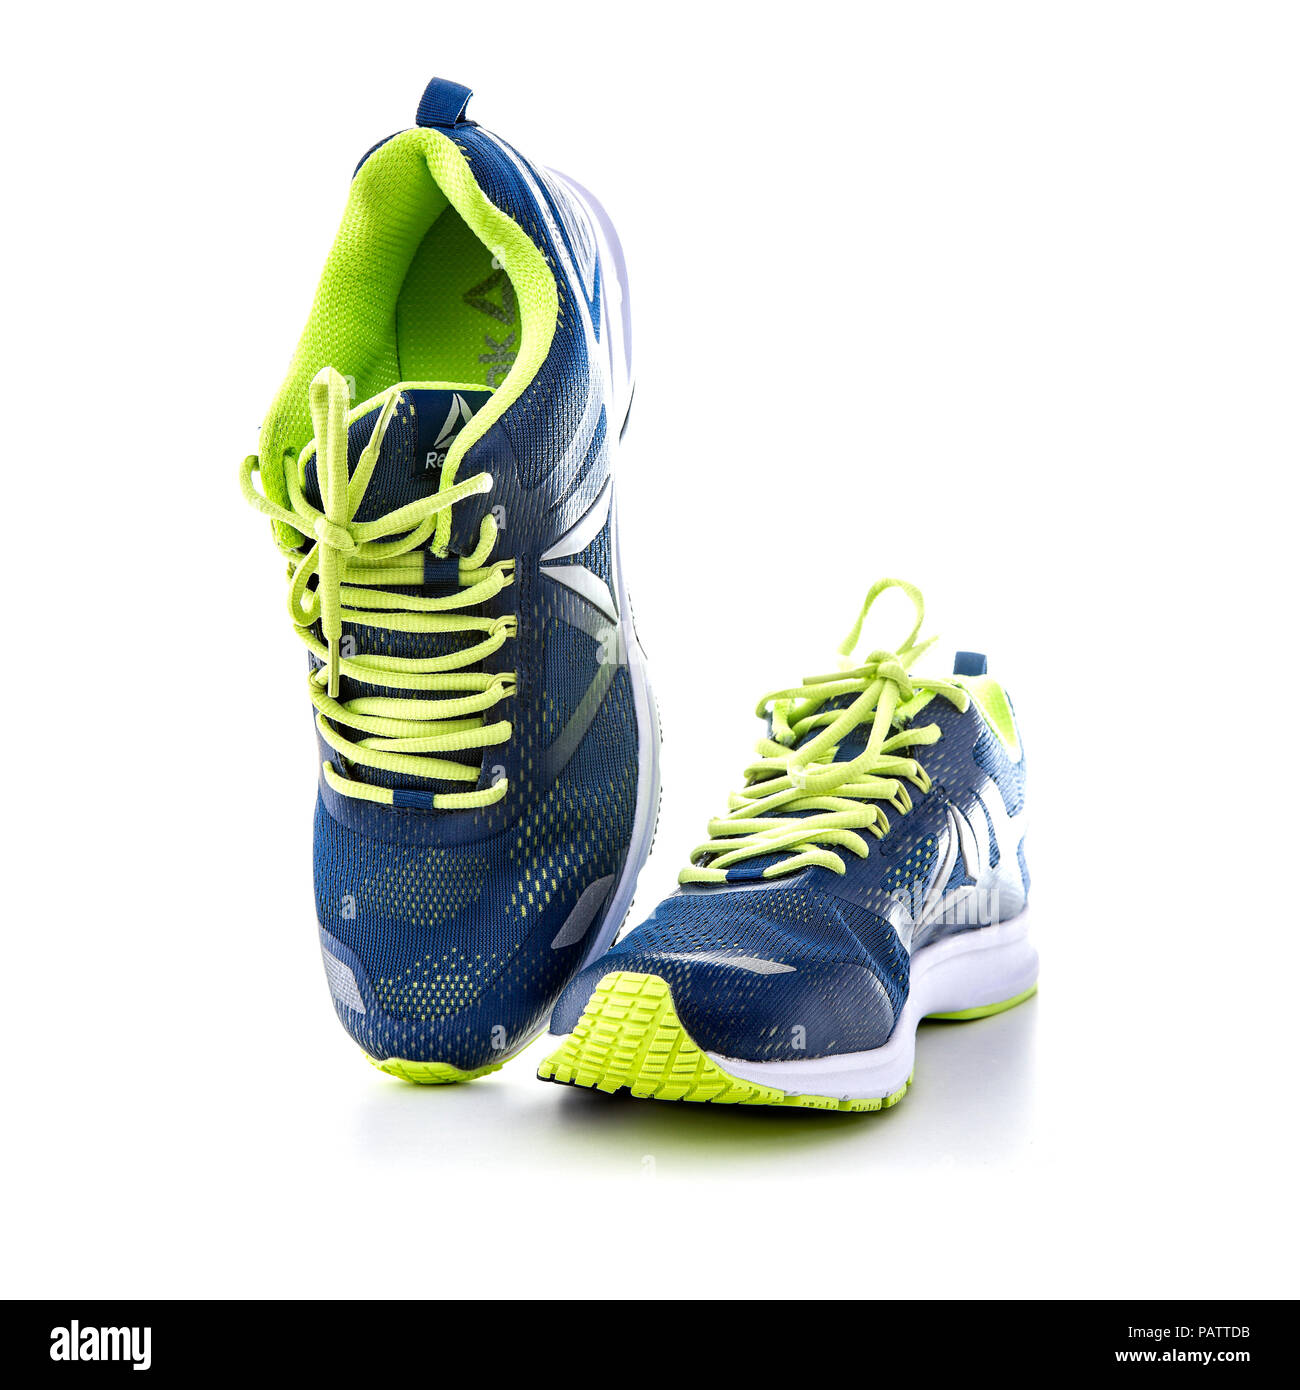 Reebok Sneakers High Resolution Stock Photography and Images - Alamy